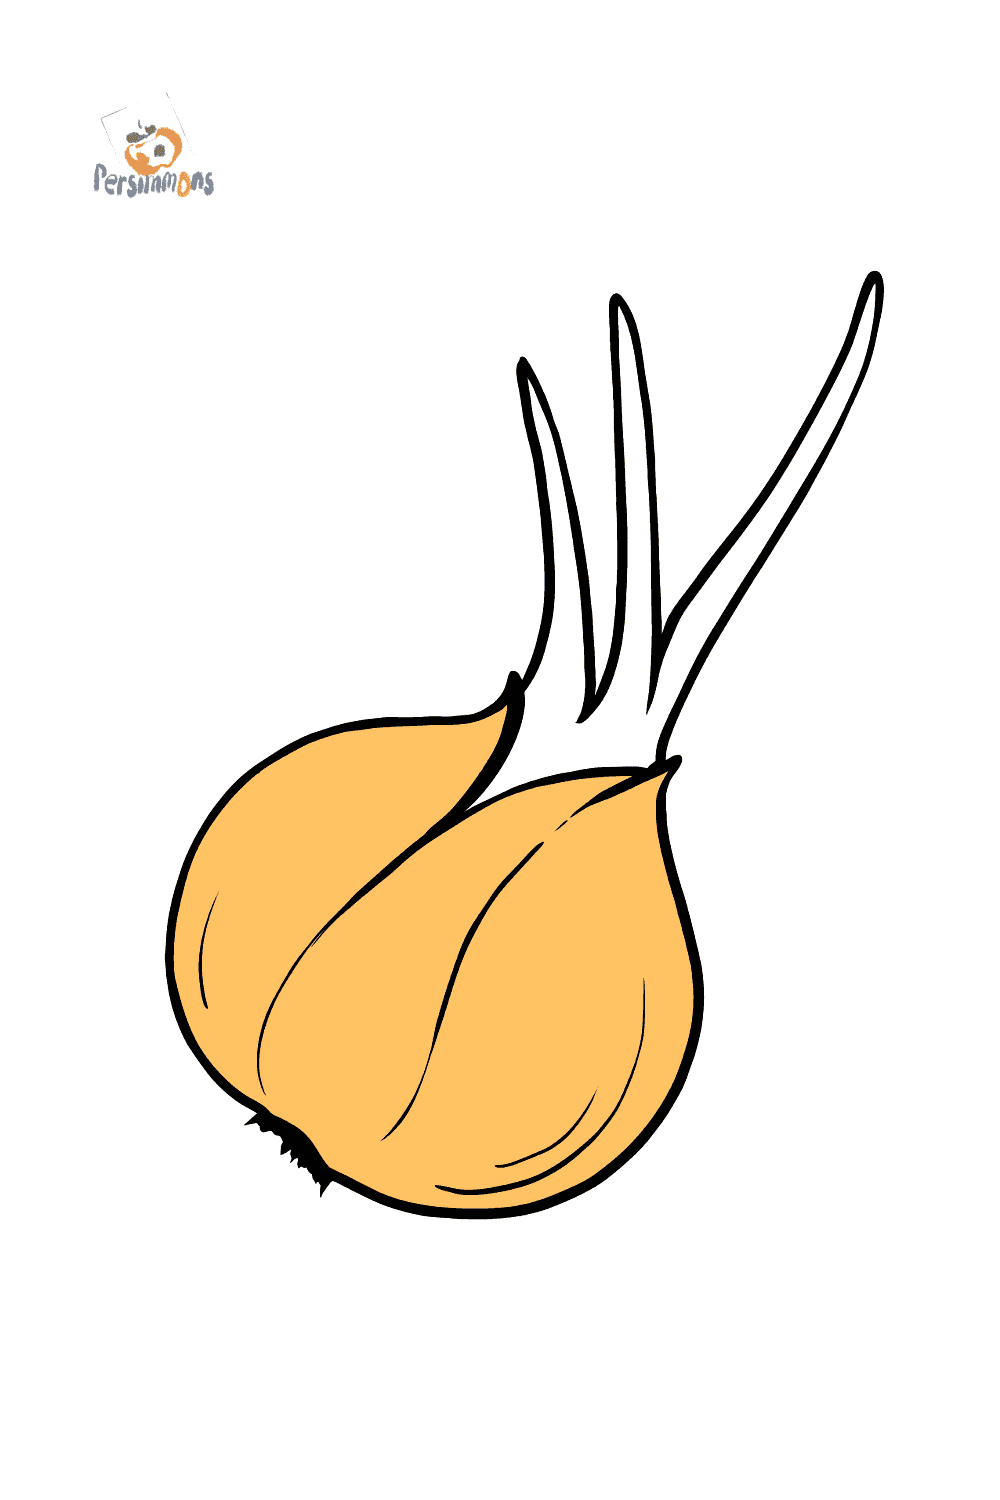 How to Draw an Onion Step by Step Tutorial - EasyDrawingTips | Onion drawing,  Roots drawing, Drawings